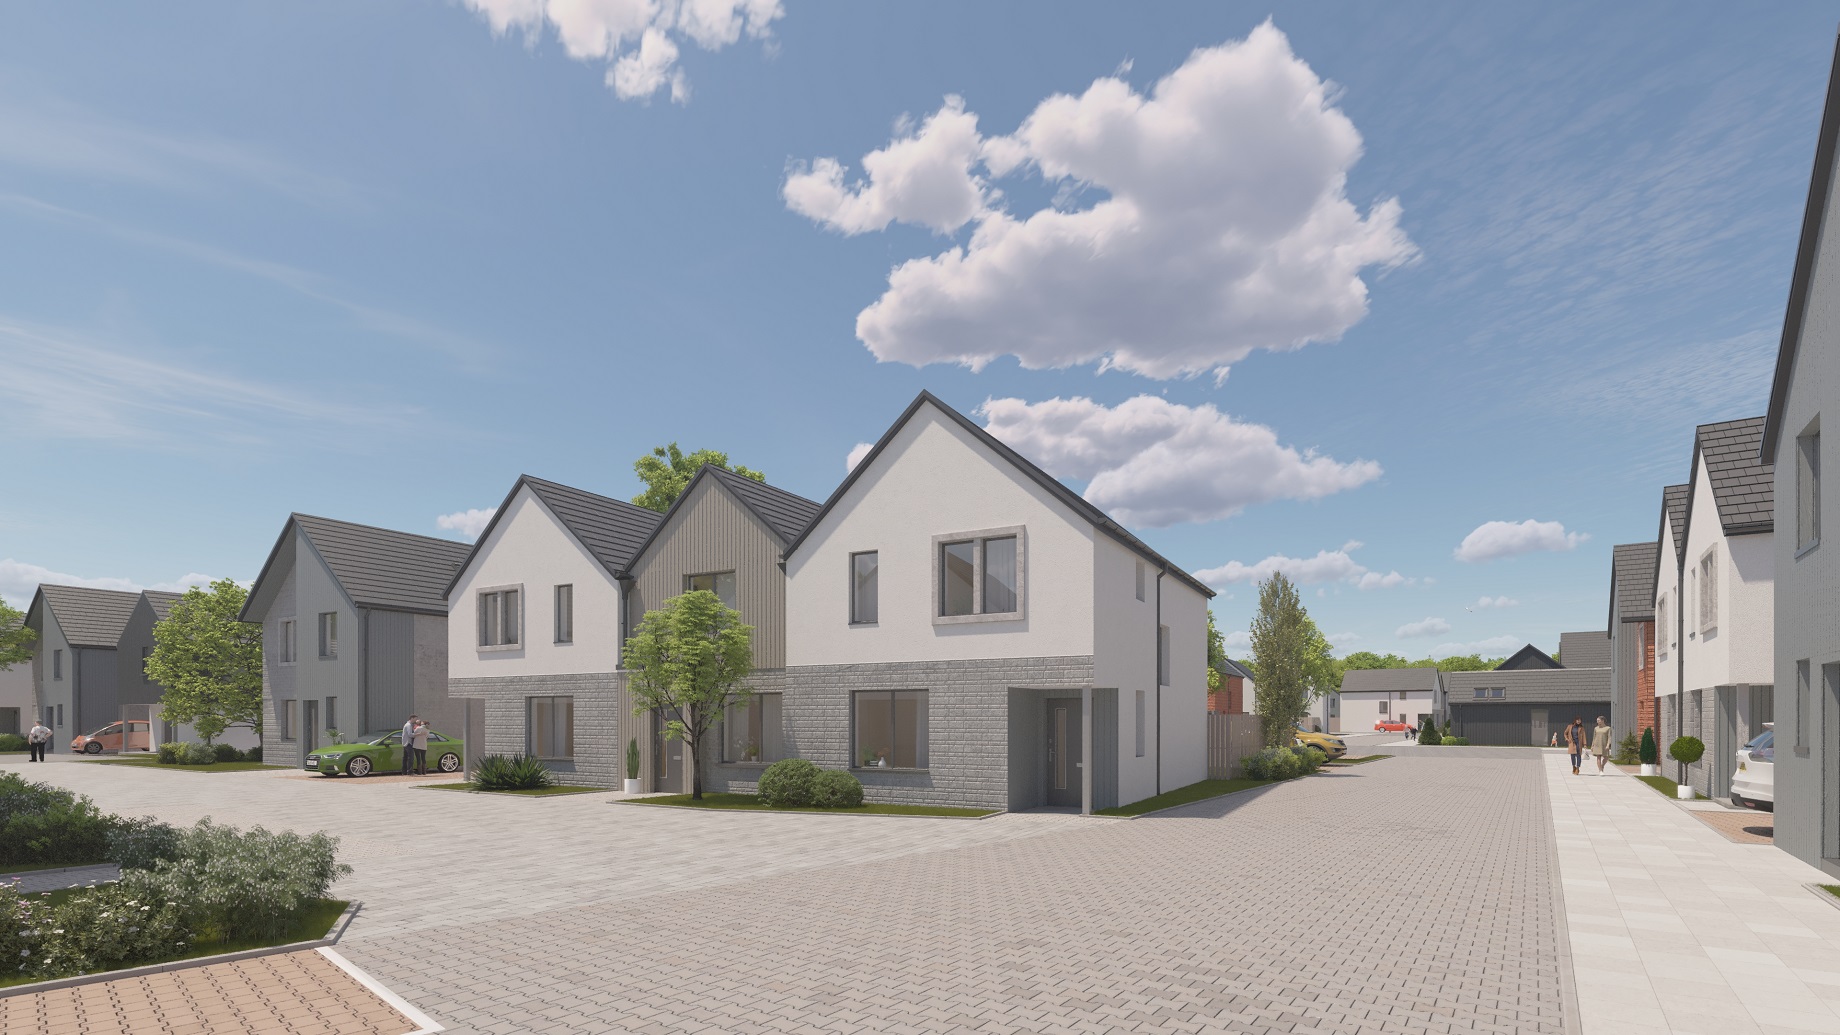 Whiteburn secures planning consent for new homes in Lauder